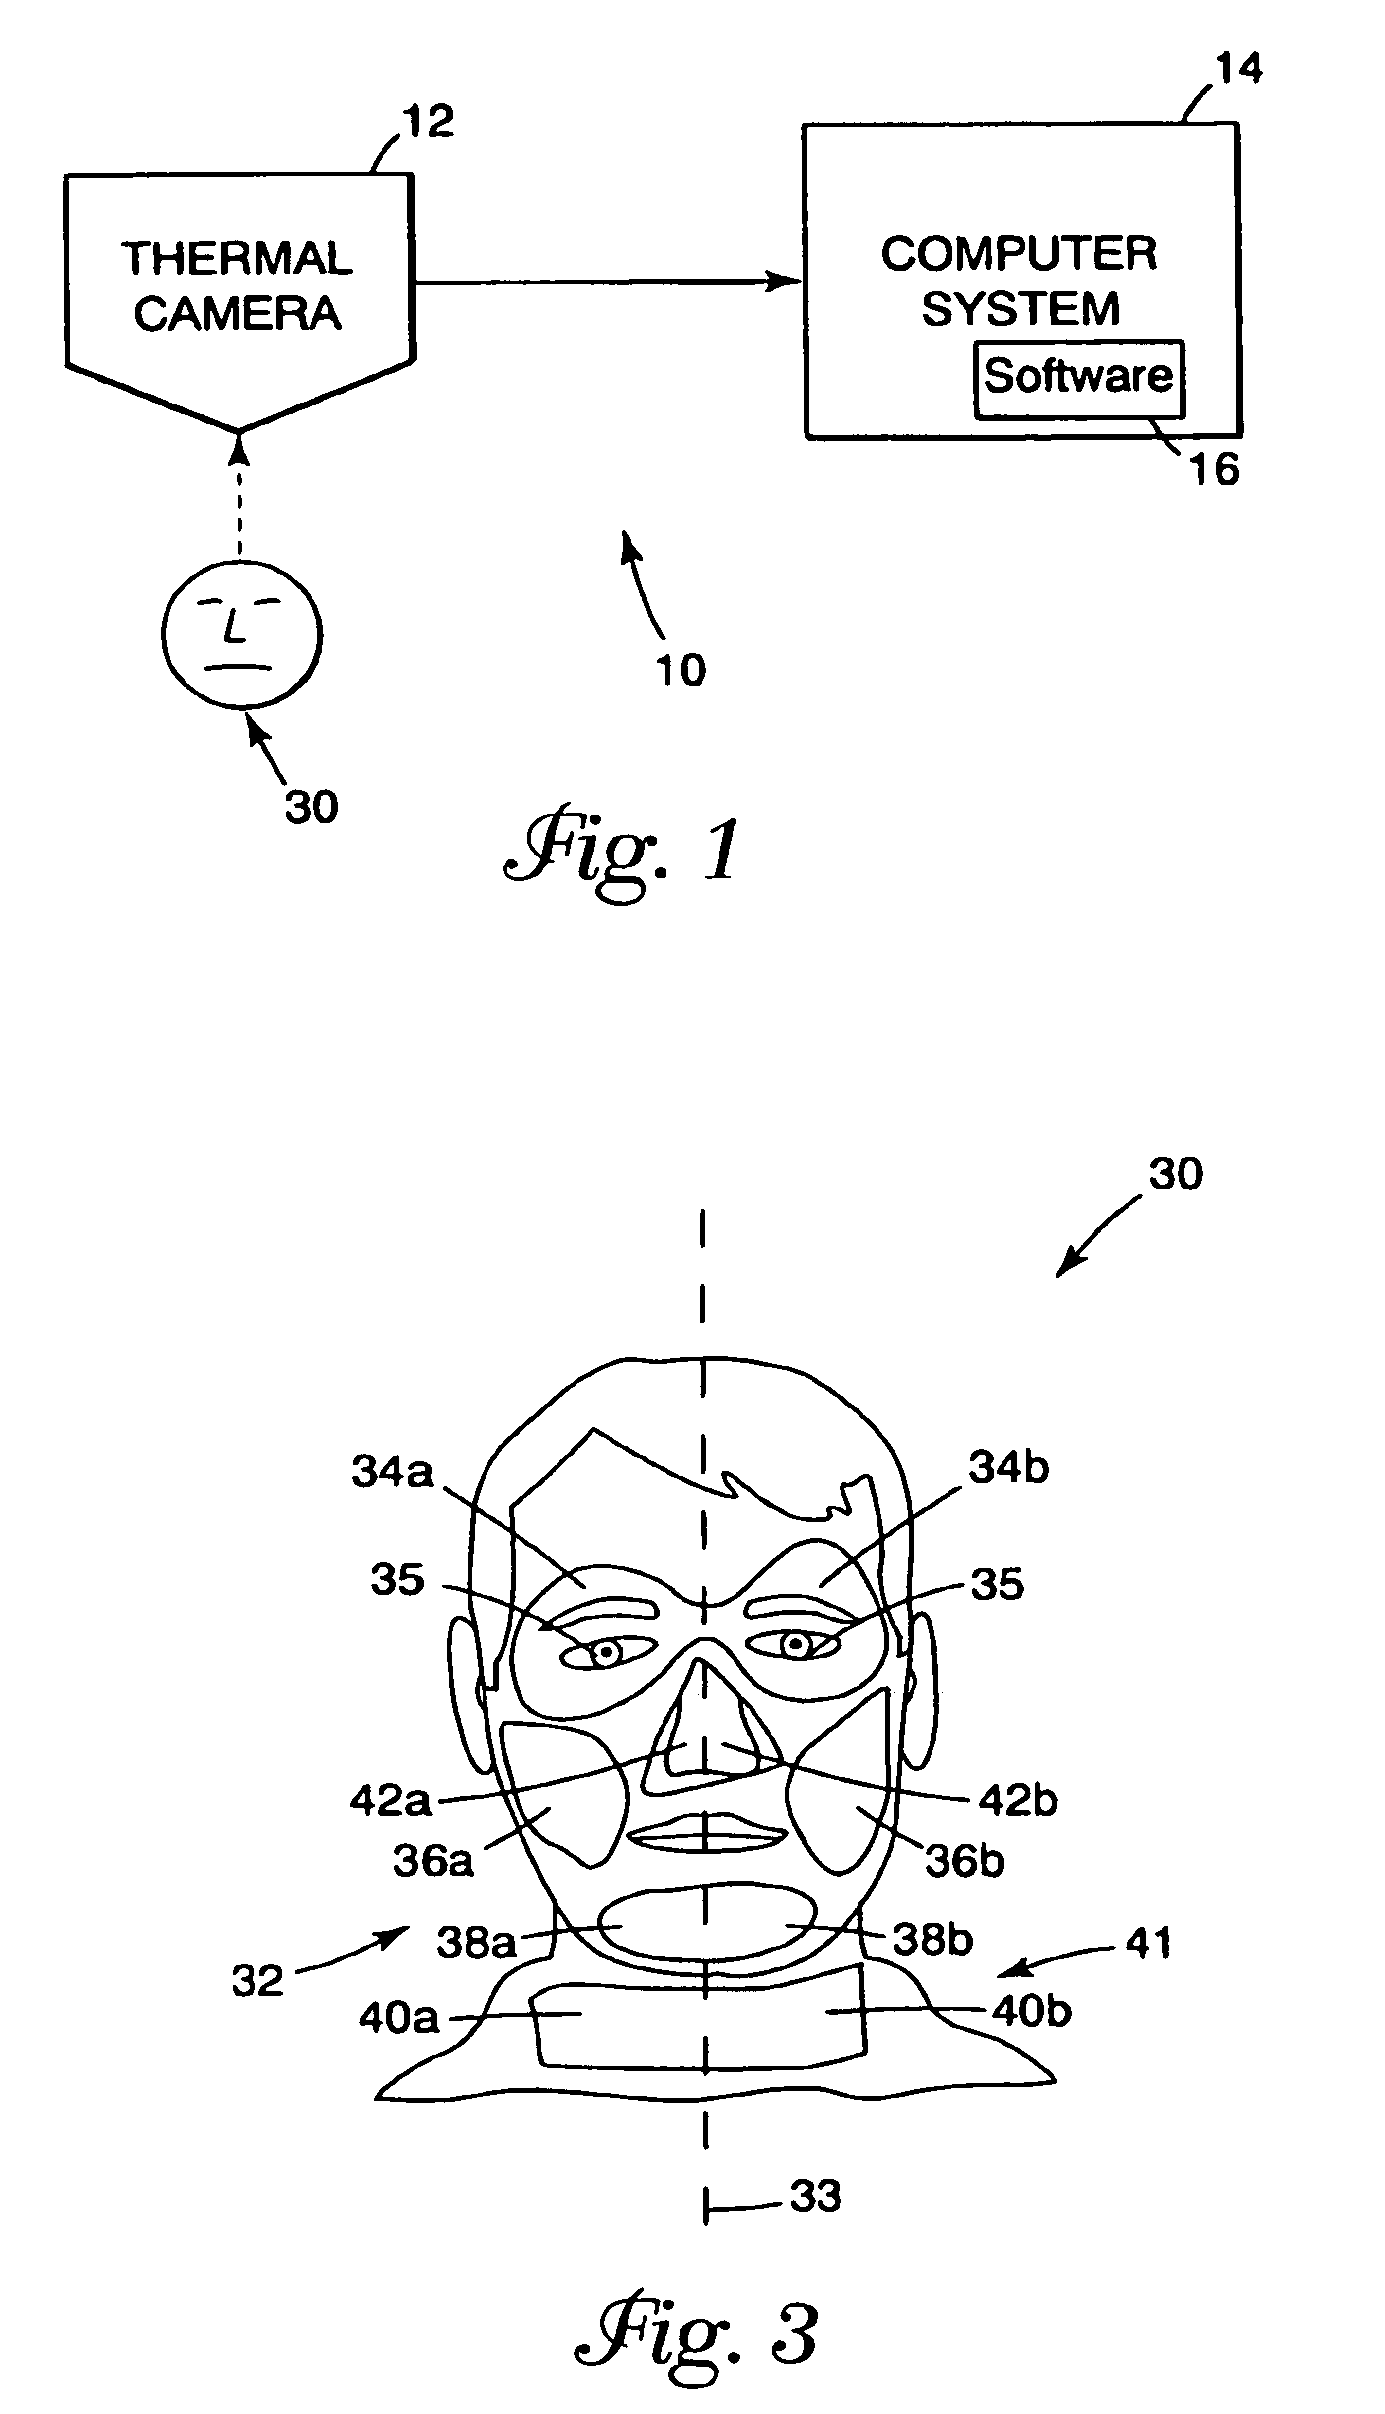 Detection system and method using thermal image analysis